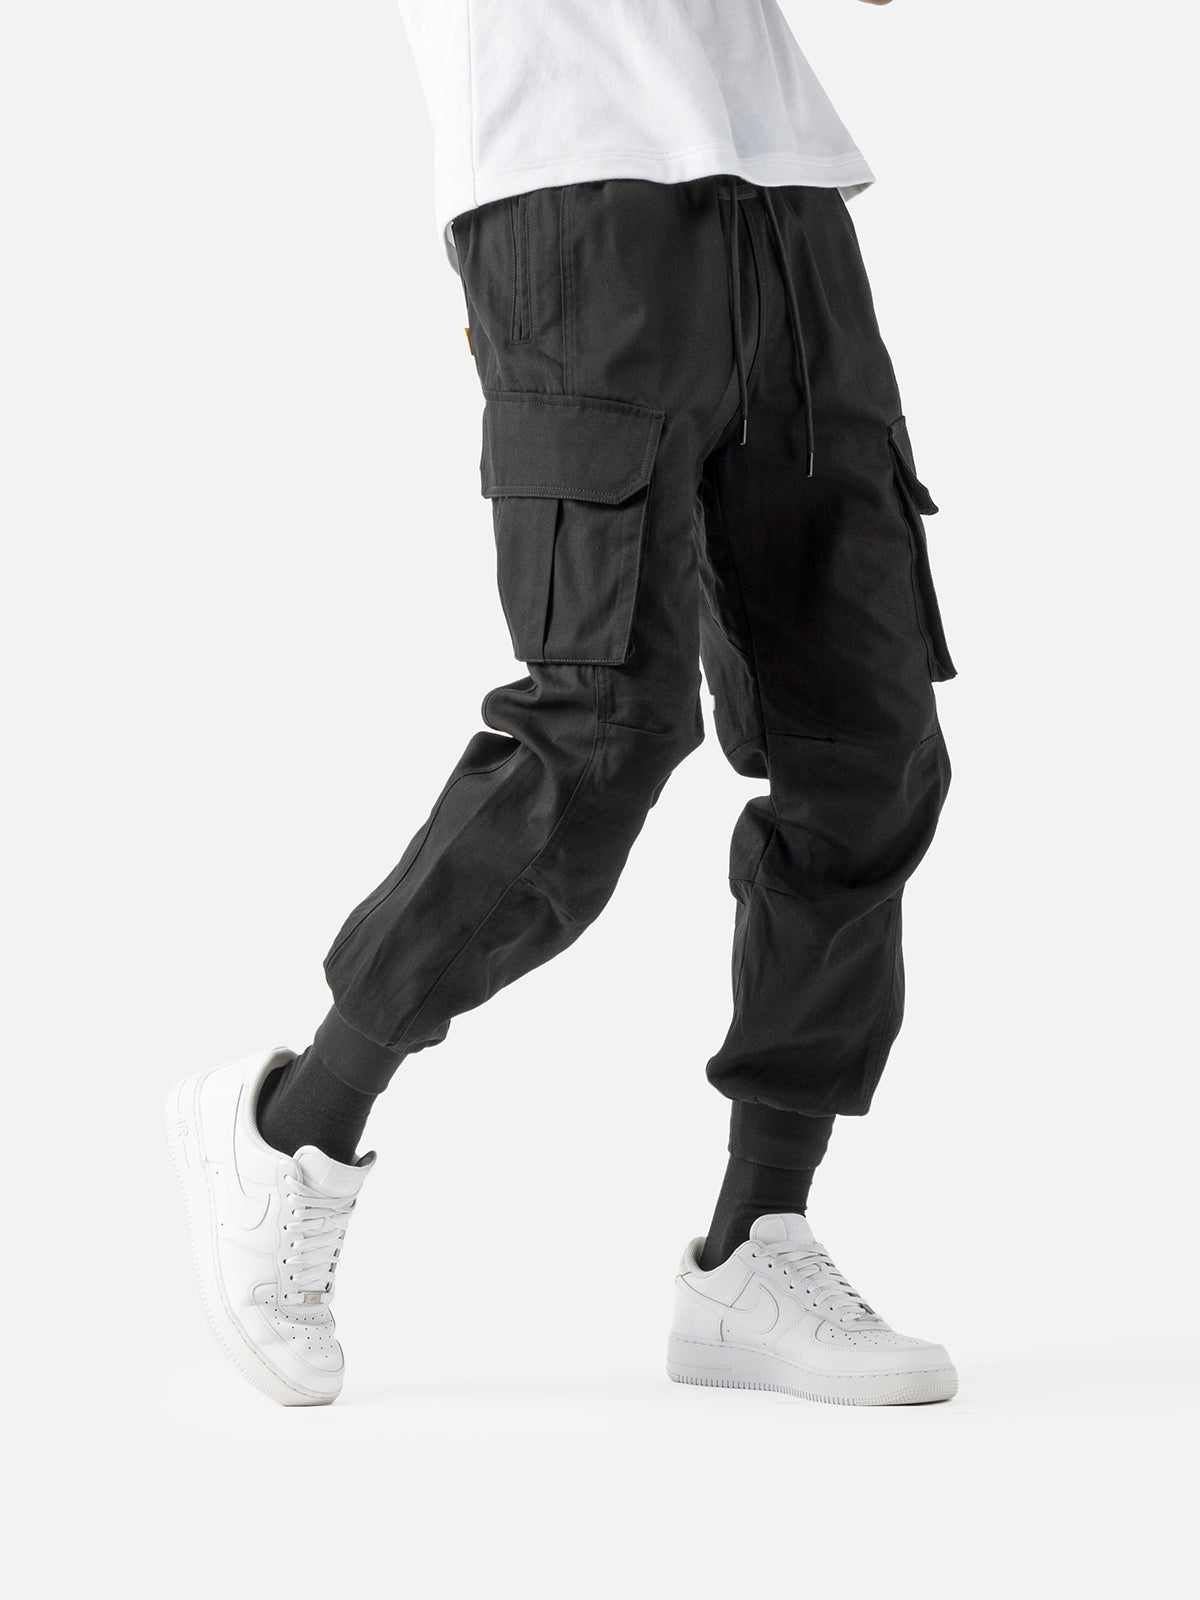 Cotton Cargo Jogger Pants for Tall Men | American Tall